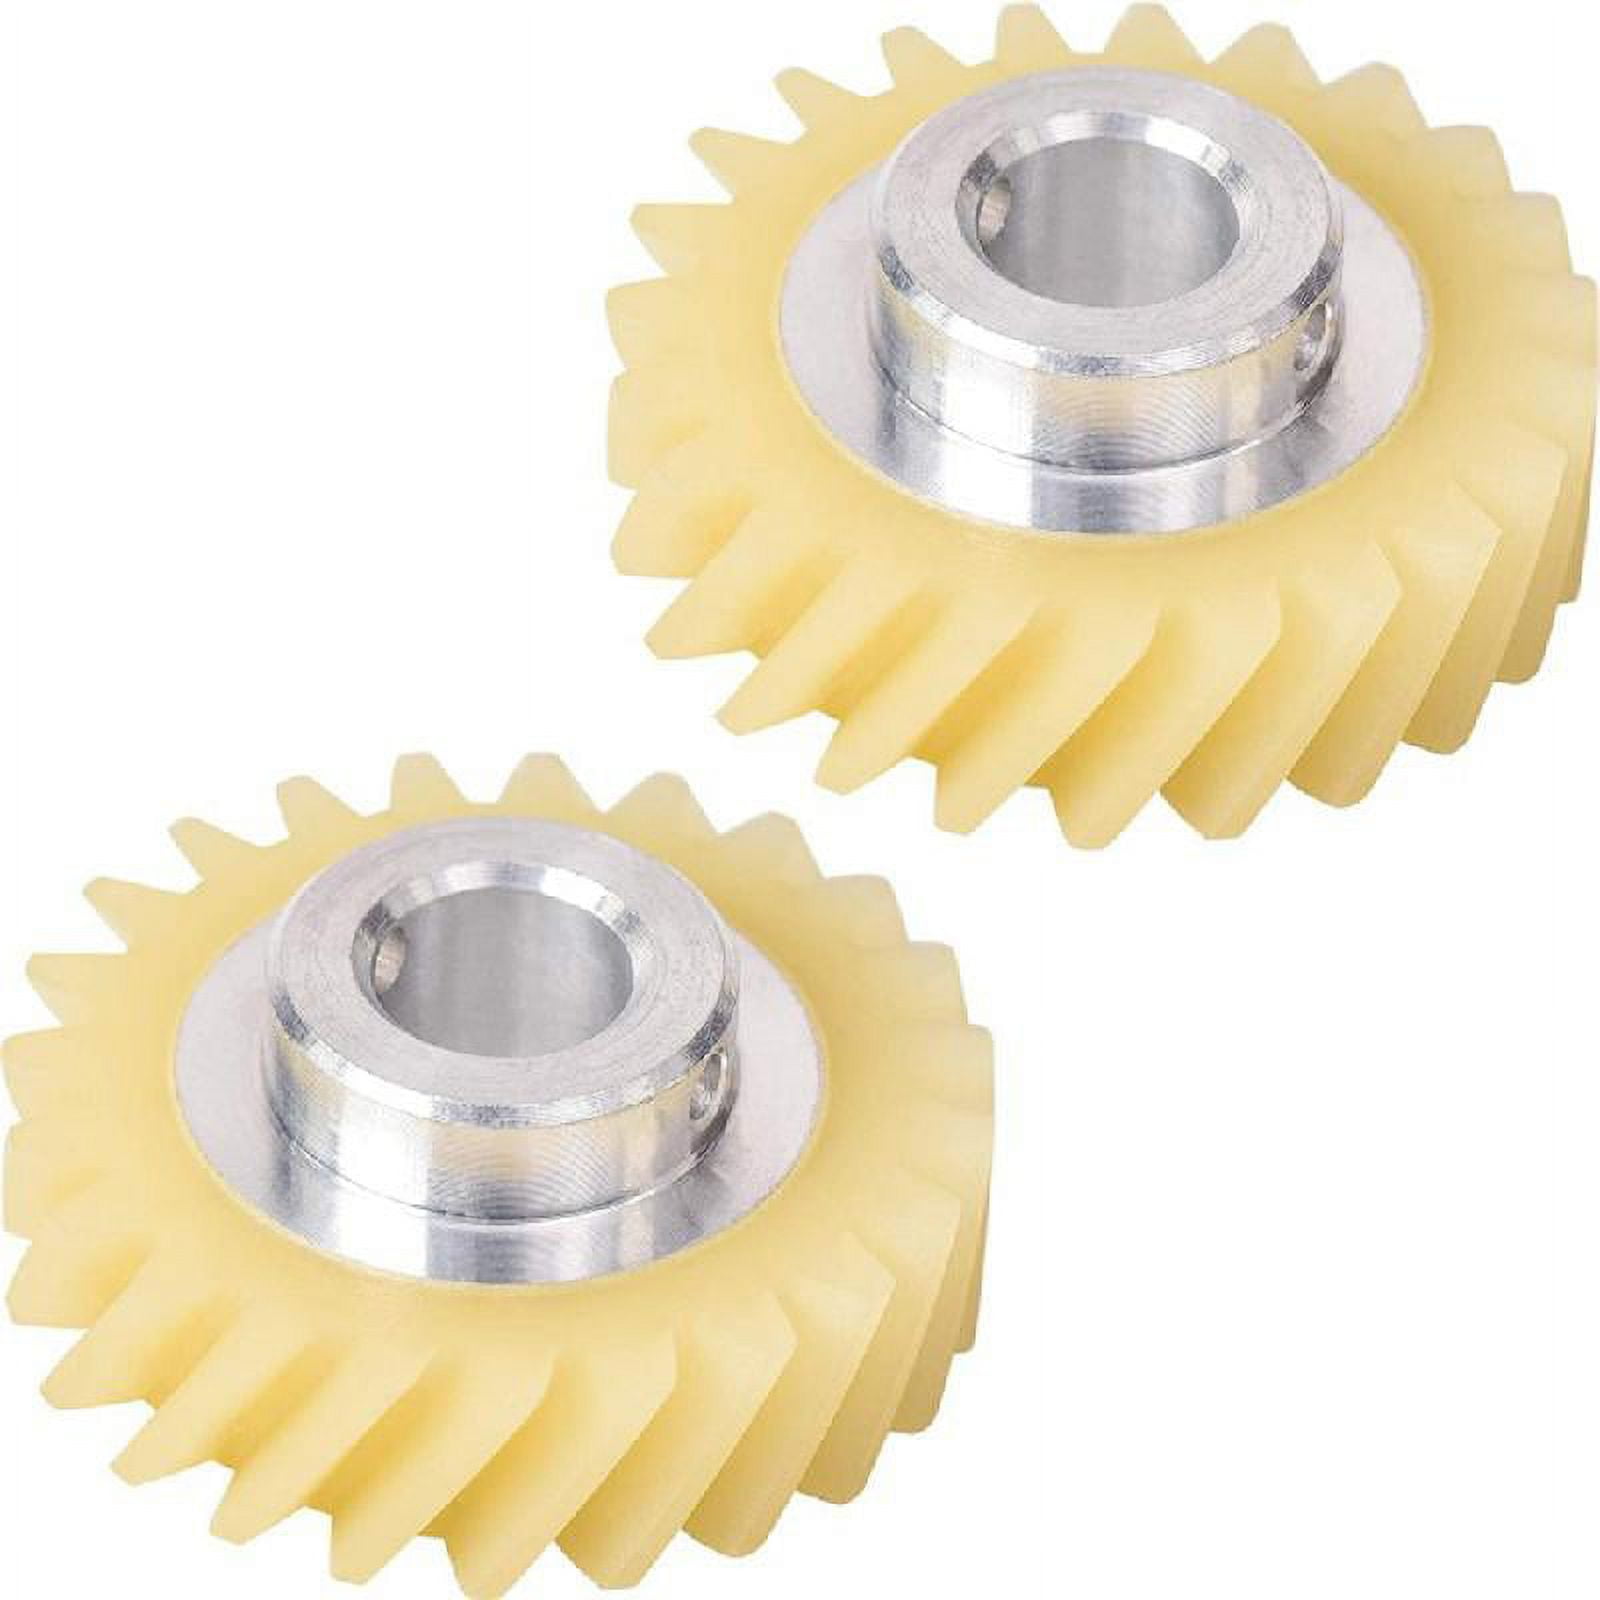 3pcs Mixer Worm Gear Replacement Part For Whirlpool & Kenmore Mixers